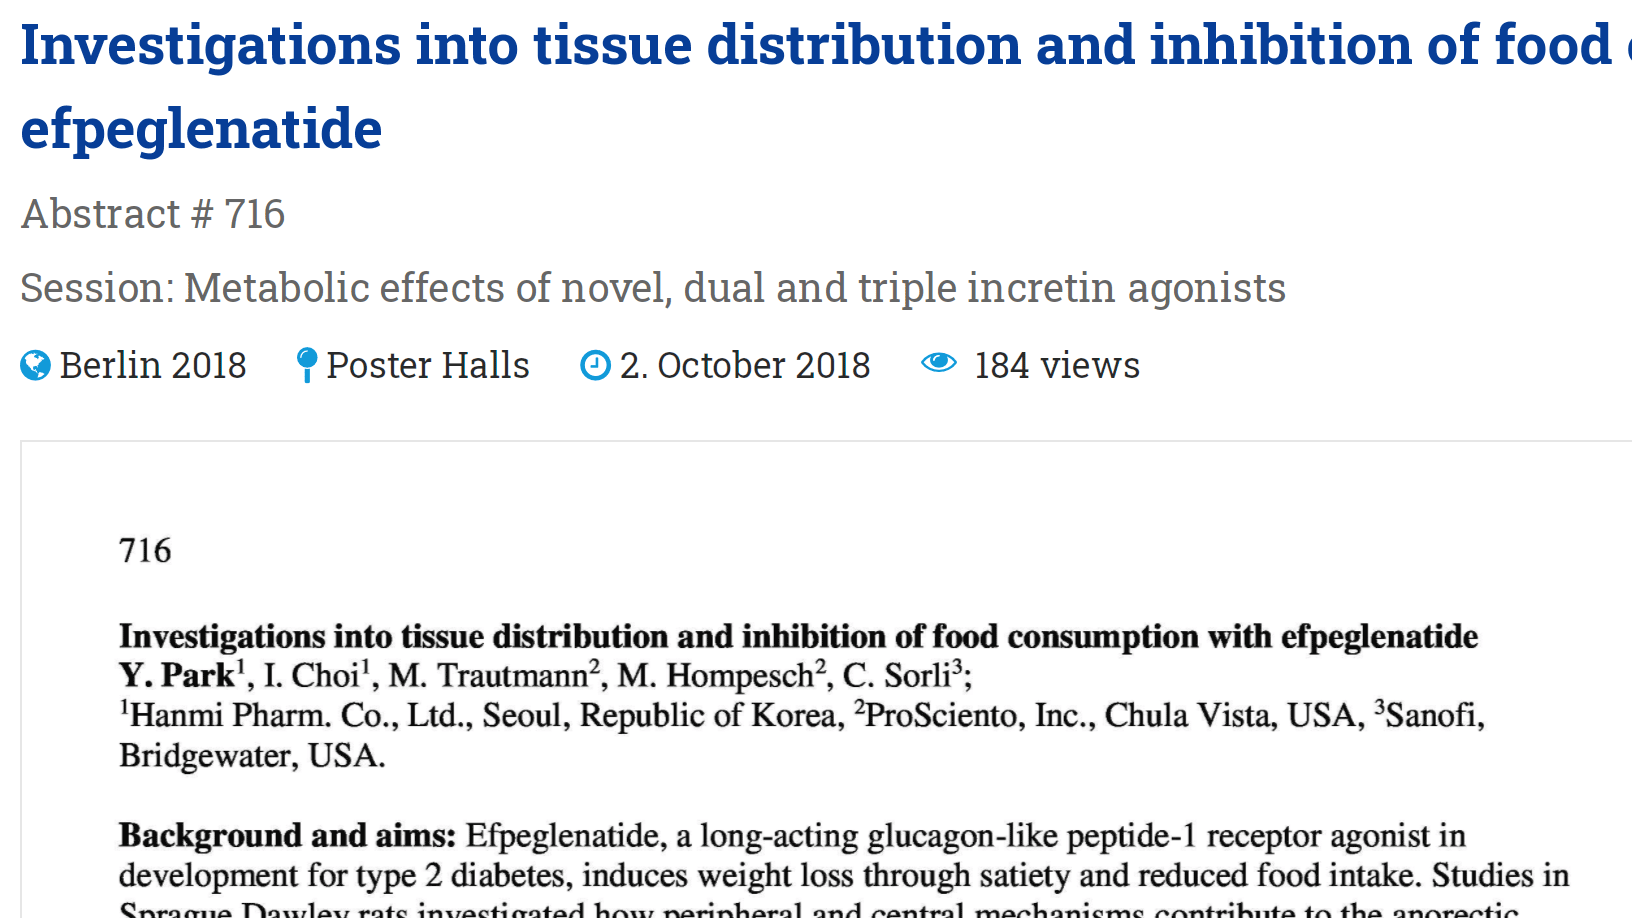 image of Investigations into tissue distribution and inhibition of food consumption with efpeglenatide